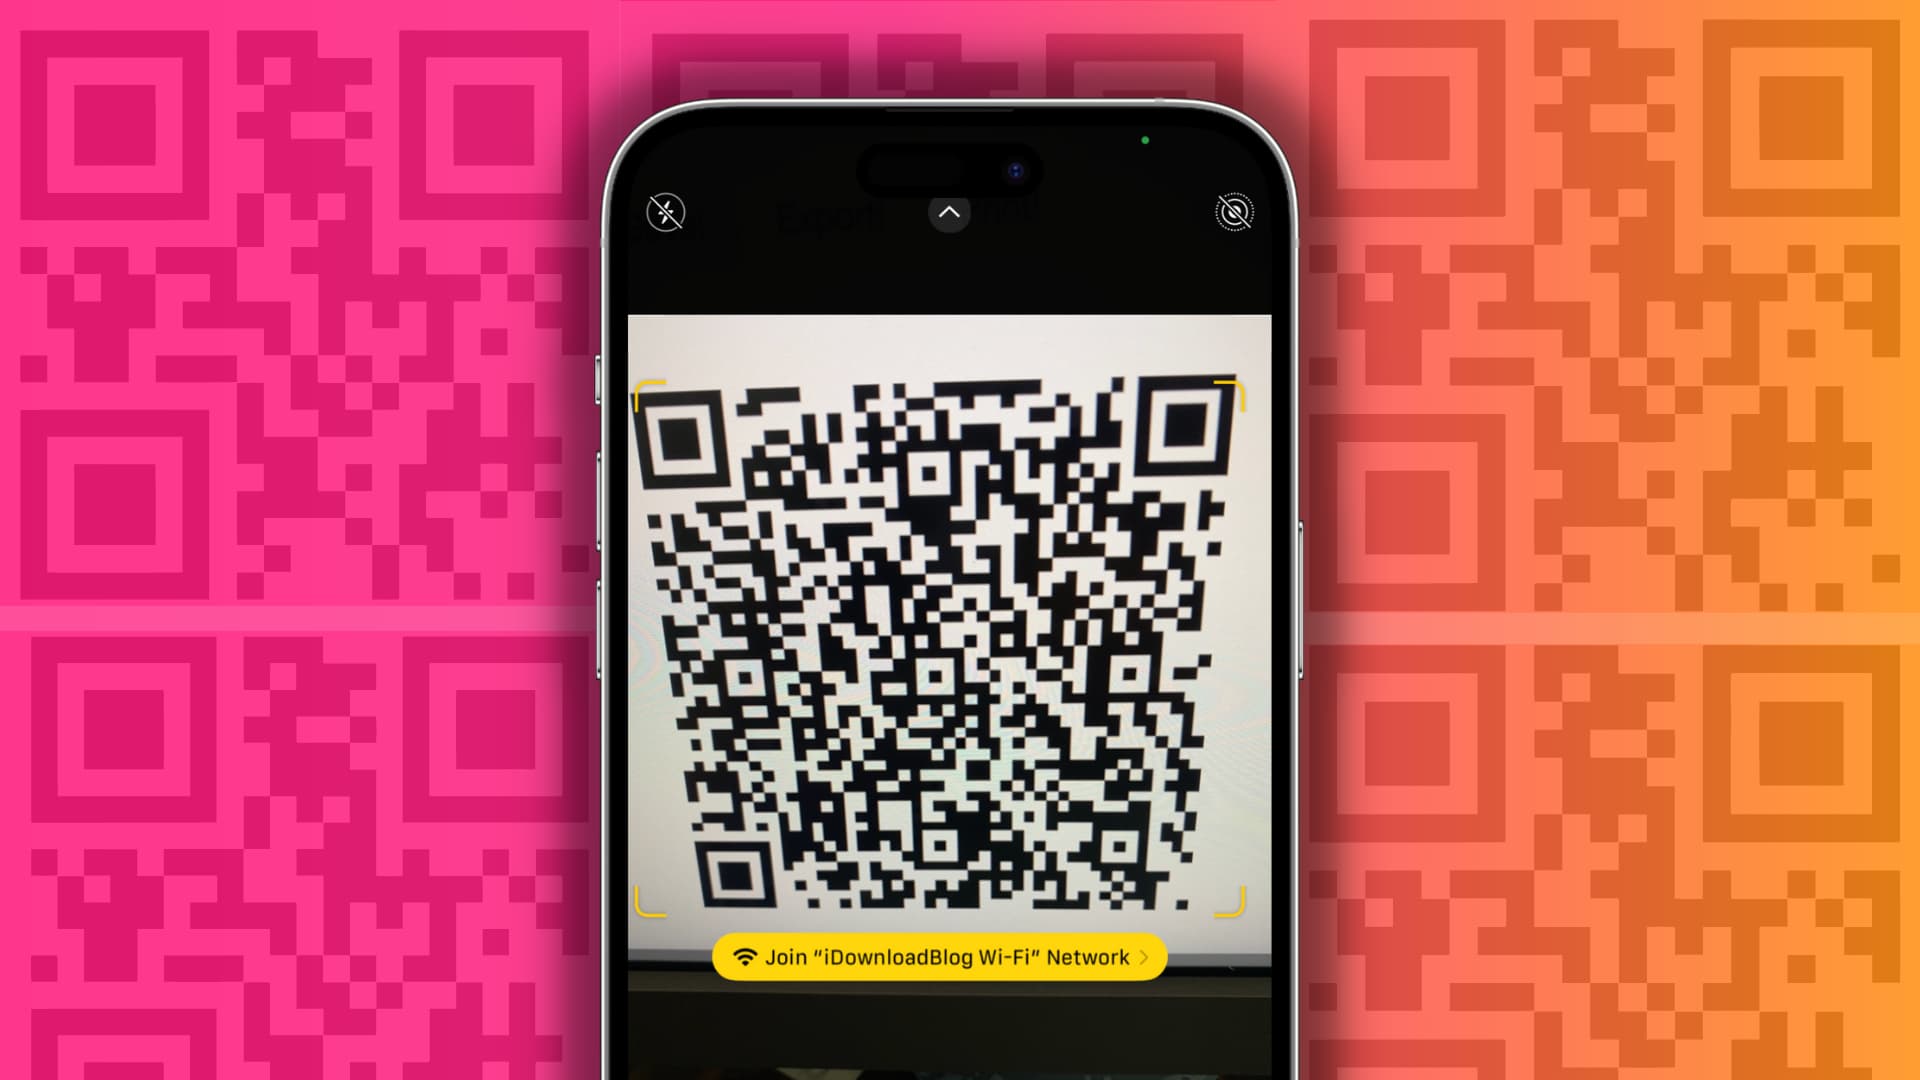 Scanning a QR code using the iPhone Camera